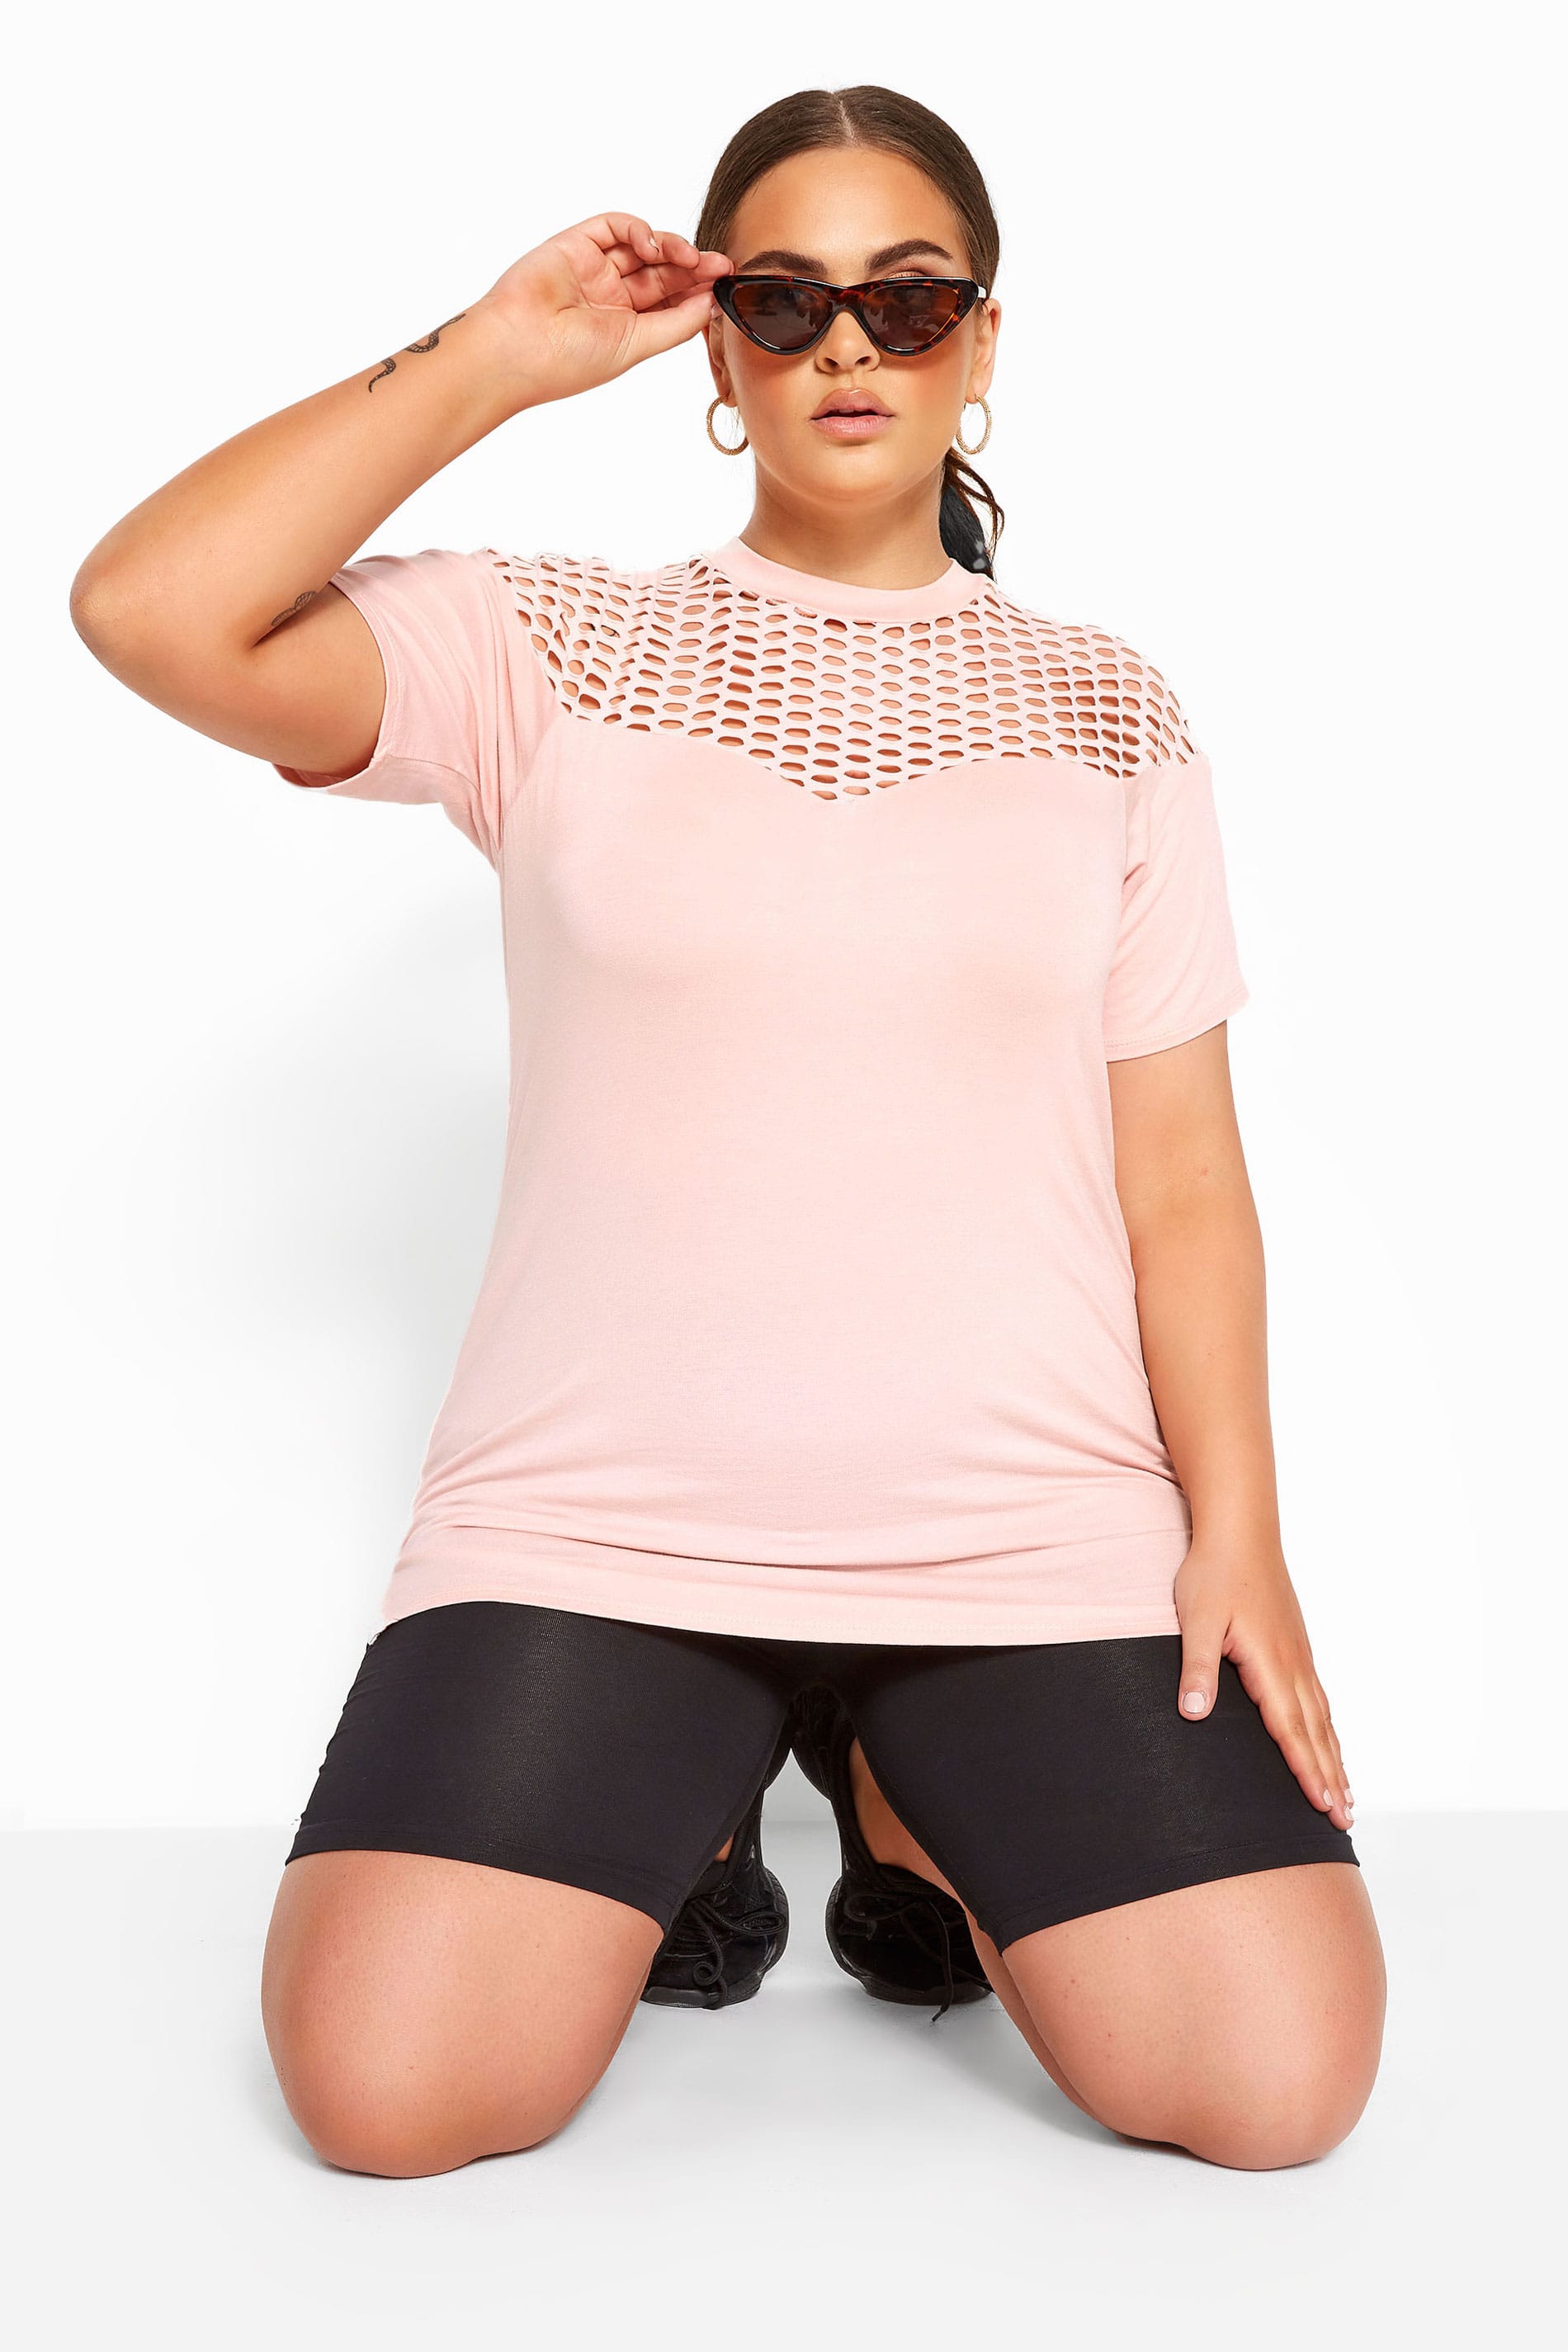 Yours Clothing Plus size limited collection pink fishnet insert top 30-32